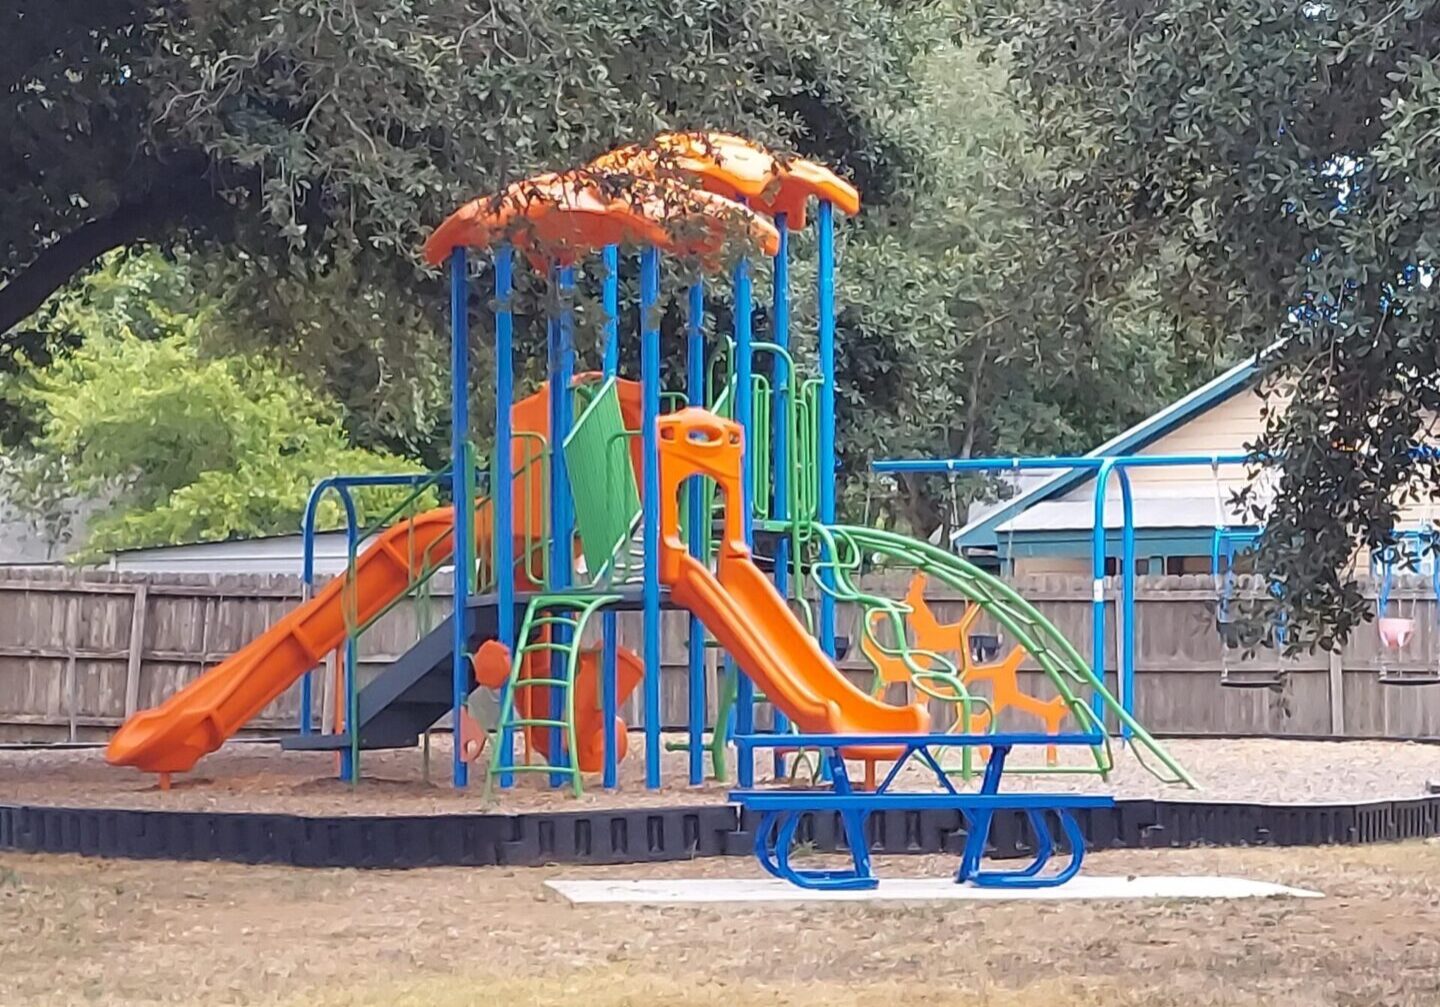 A playground with slides and swings in the middle of a park.